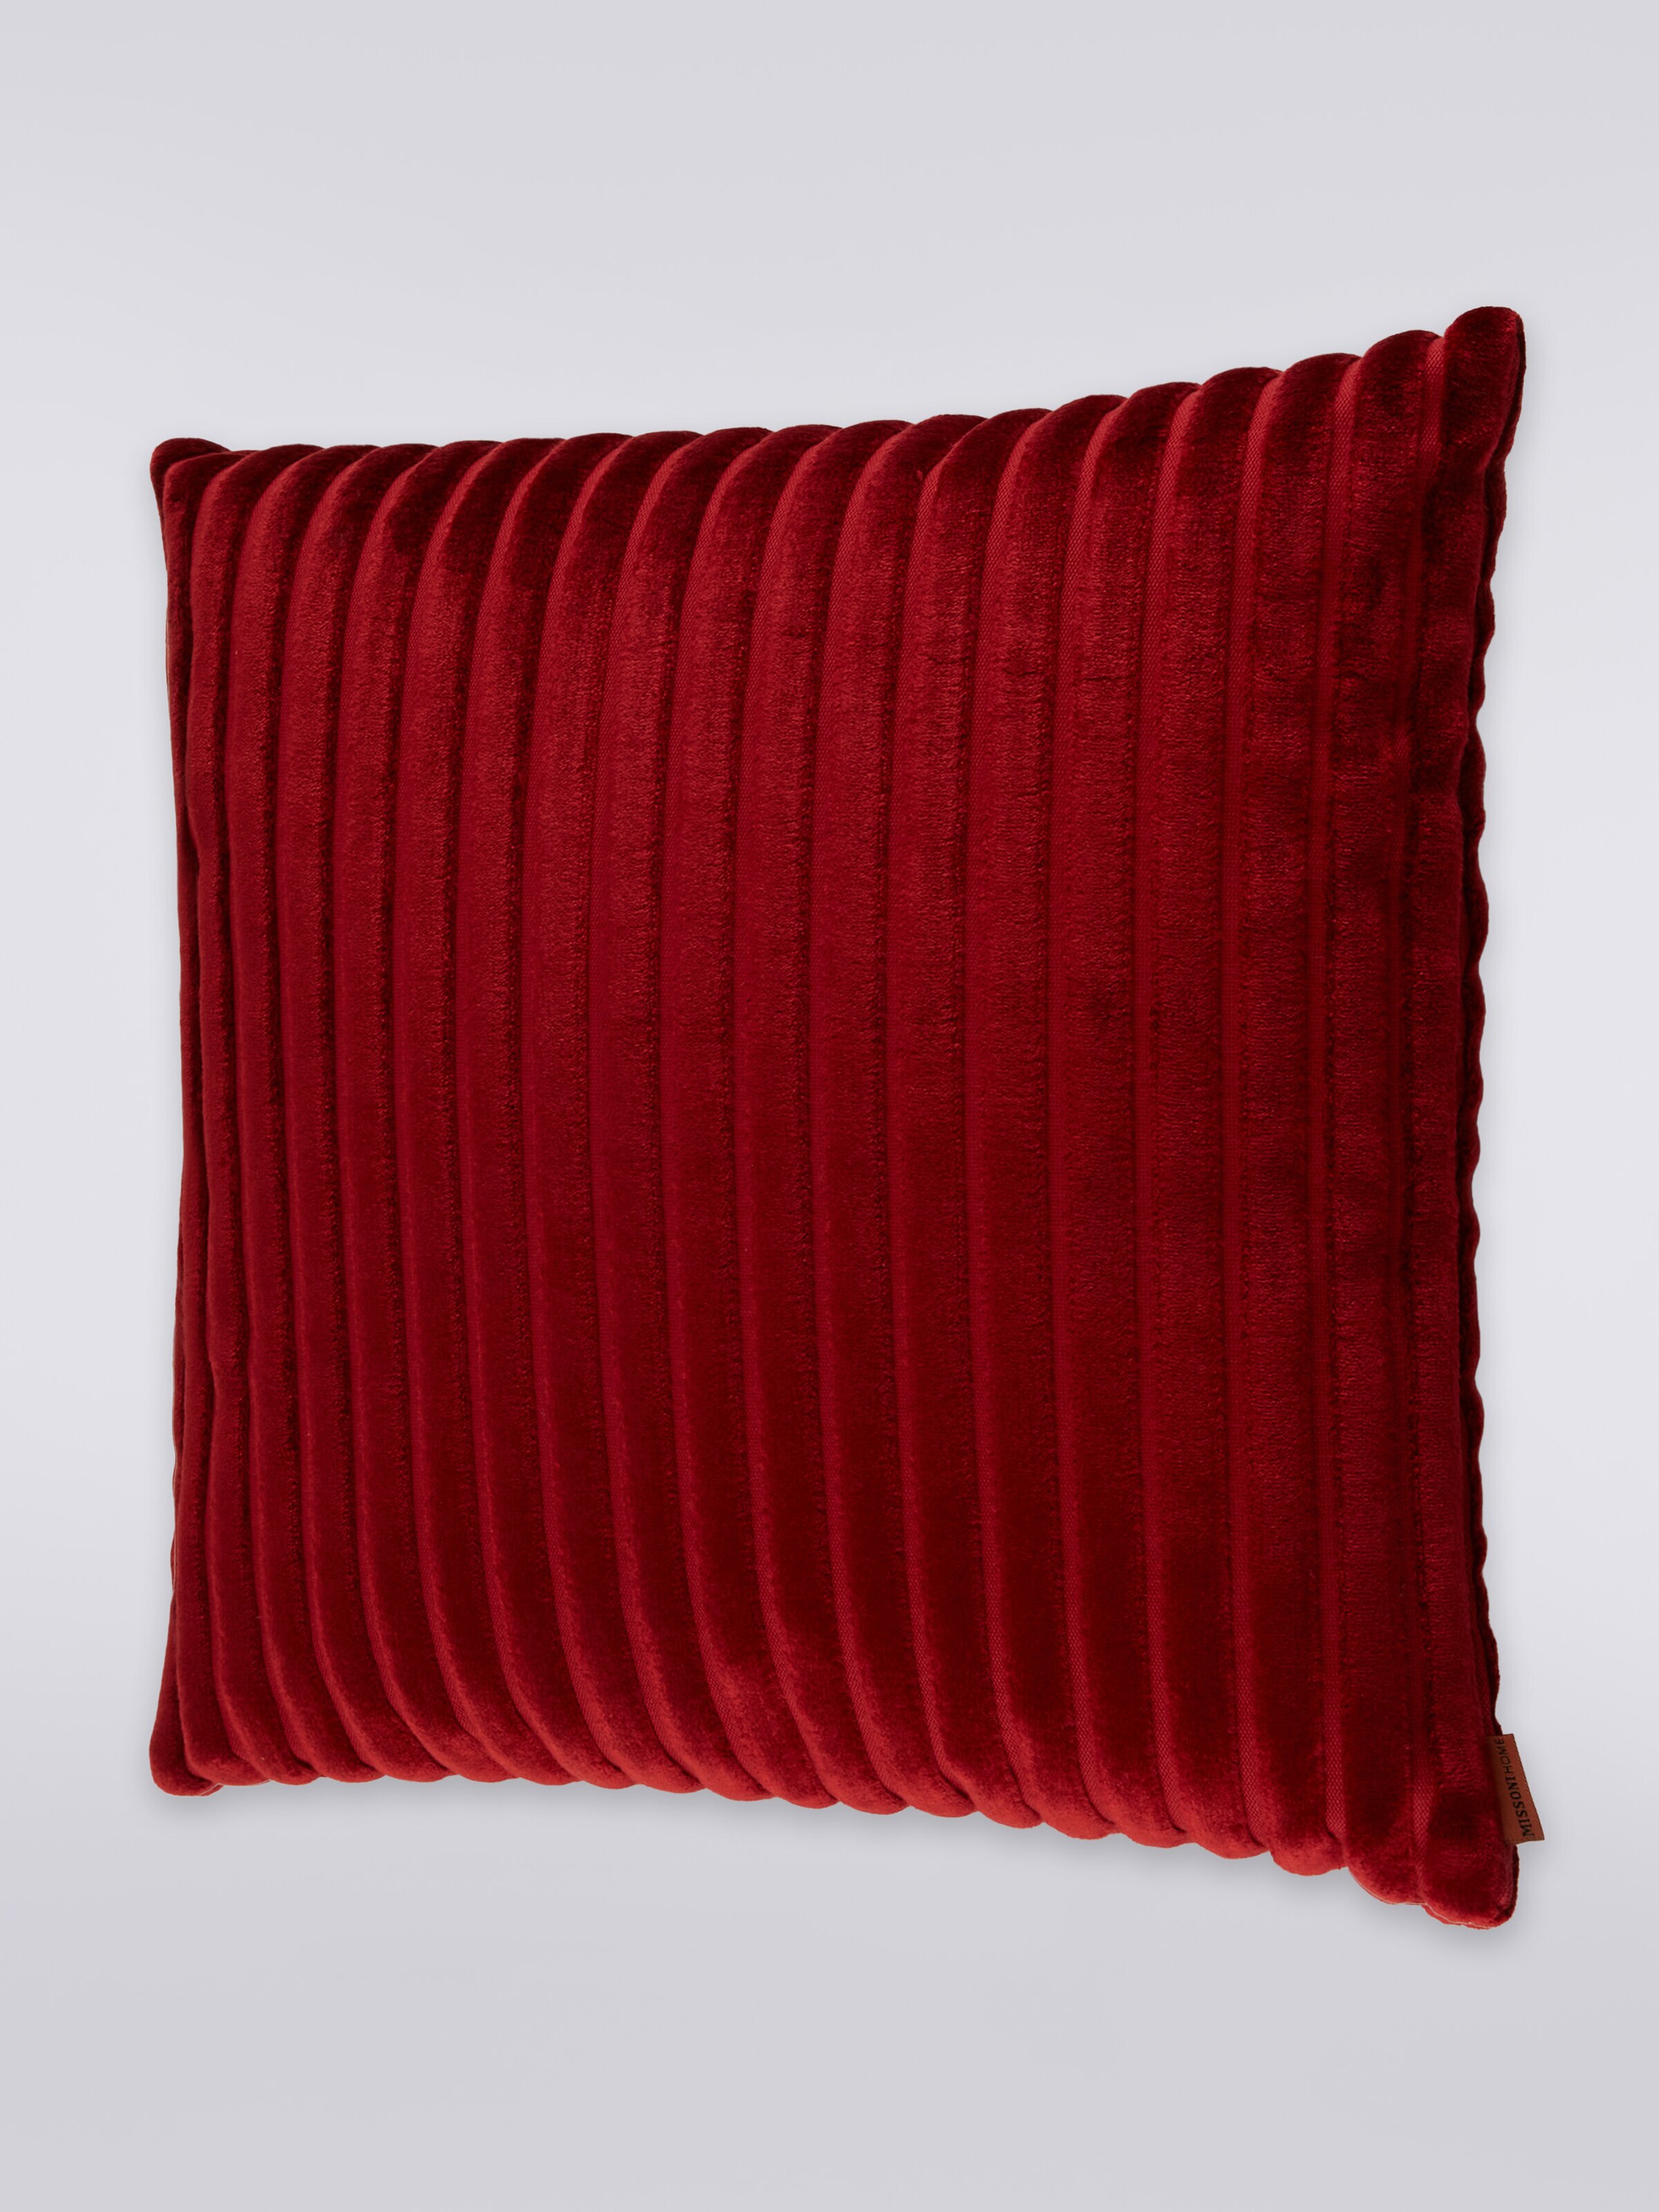 Coomba Cushion 40X40, Red  - 1